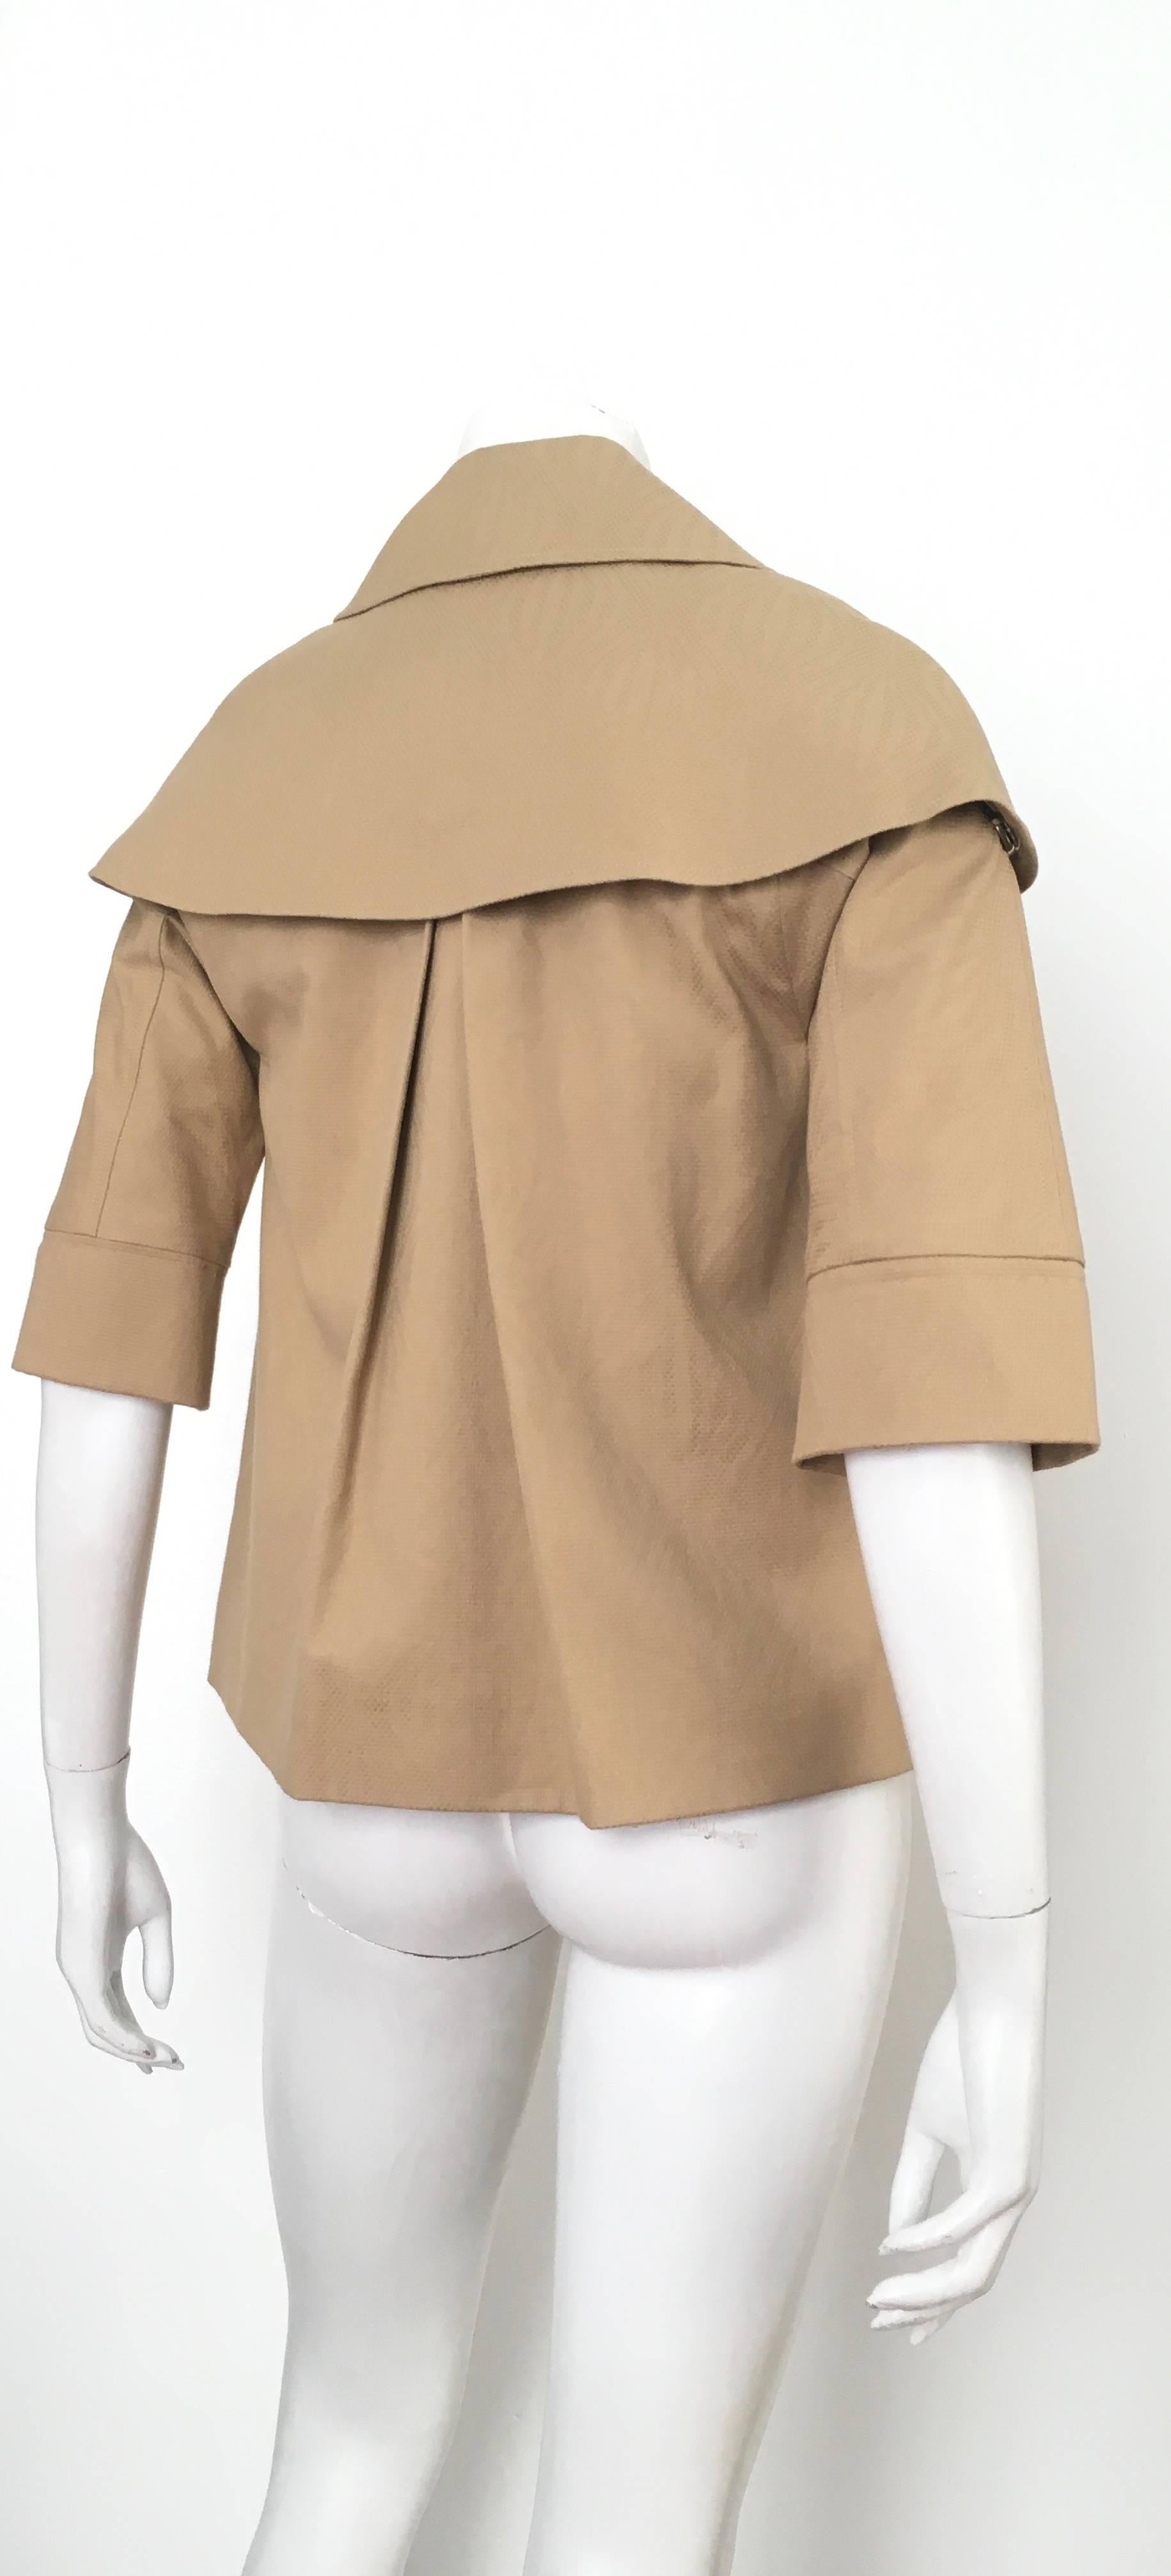 Lela Rose Tan Caped Swing Jacket Size 4. Never Worn. In New Condition For Sale In Atlanta, GA